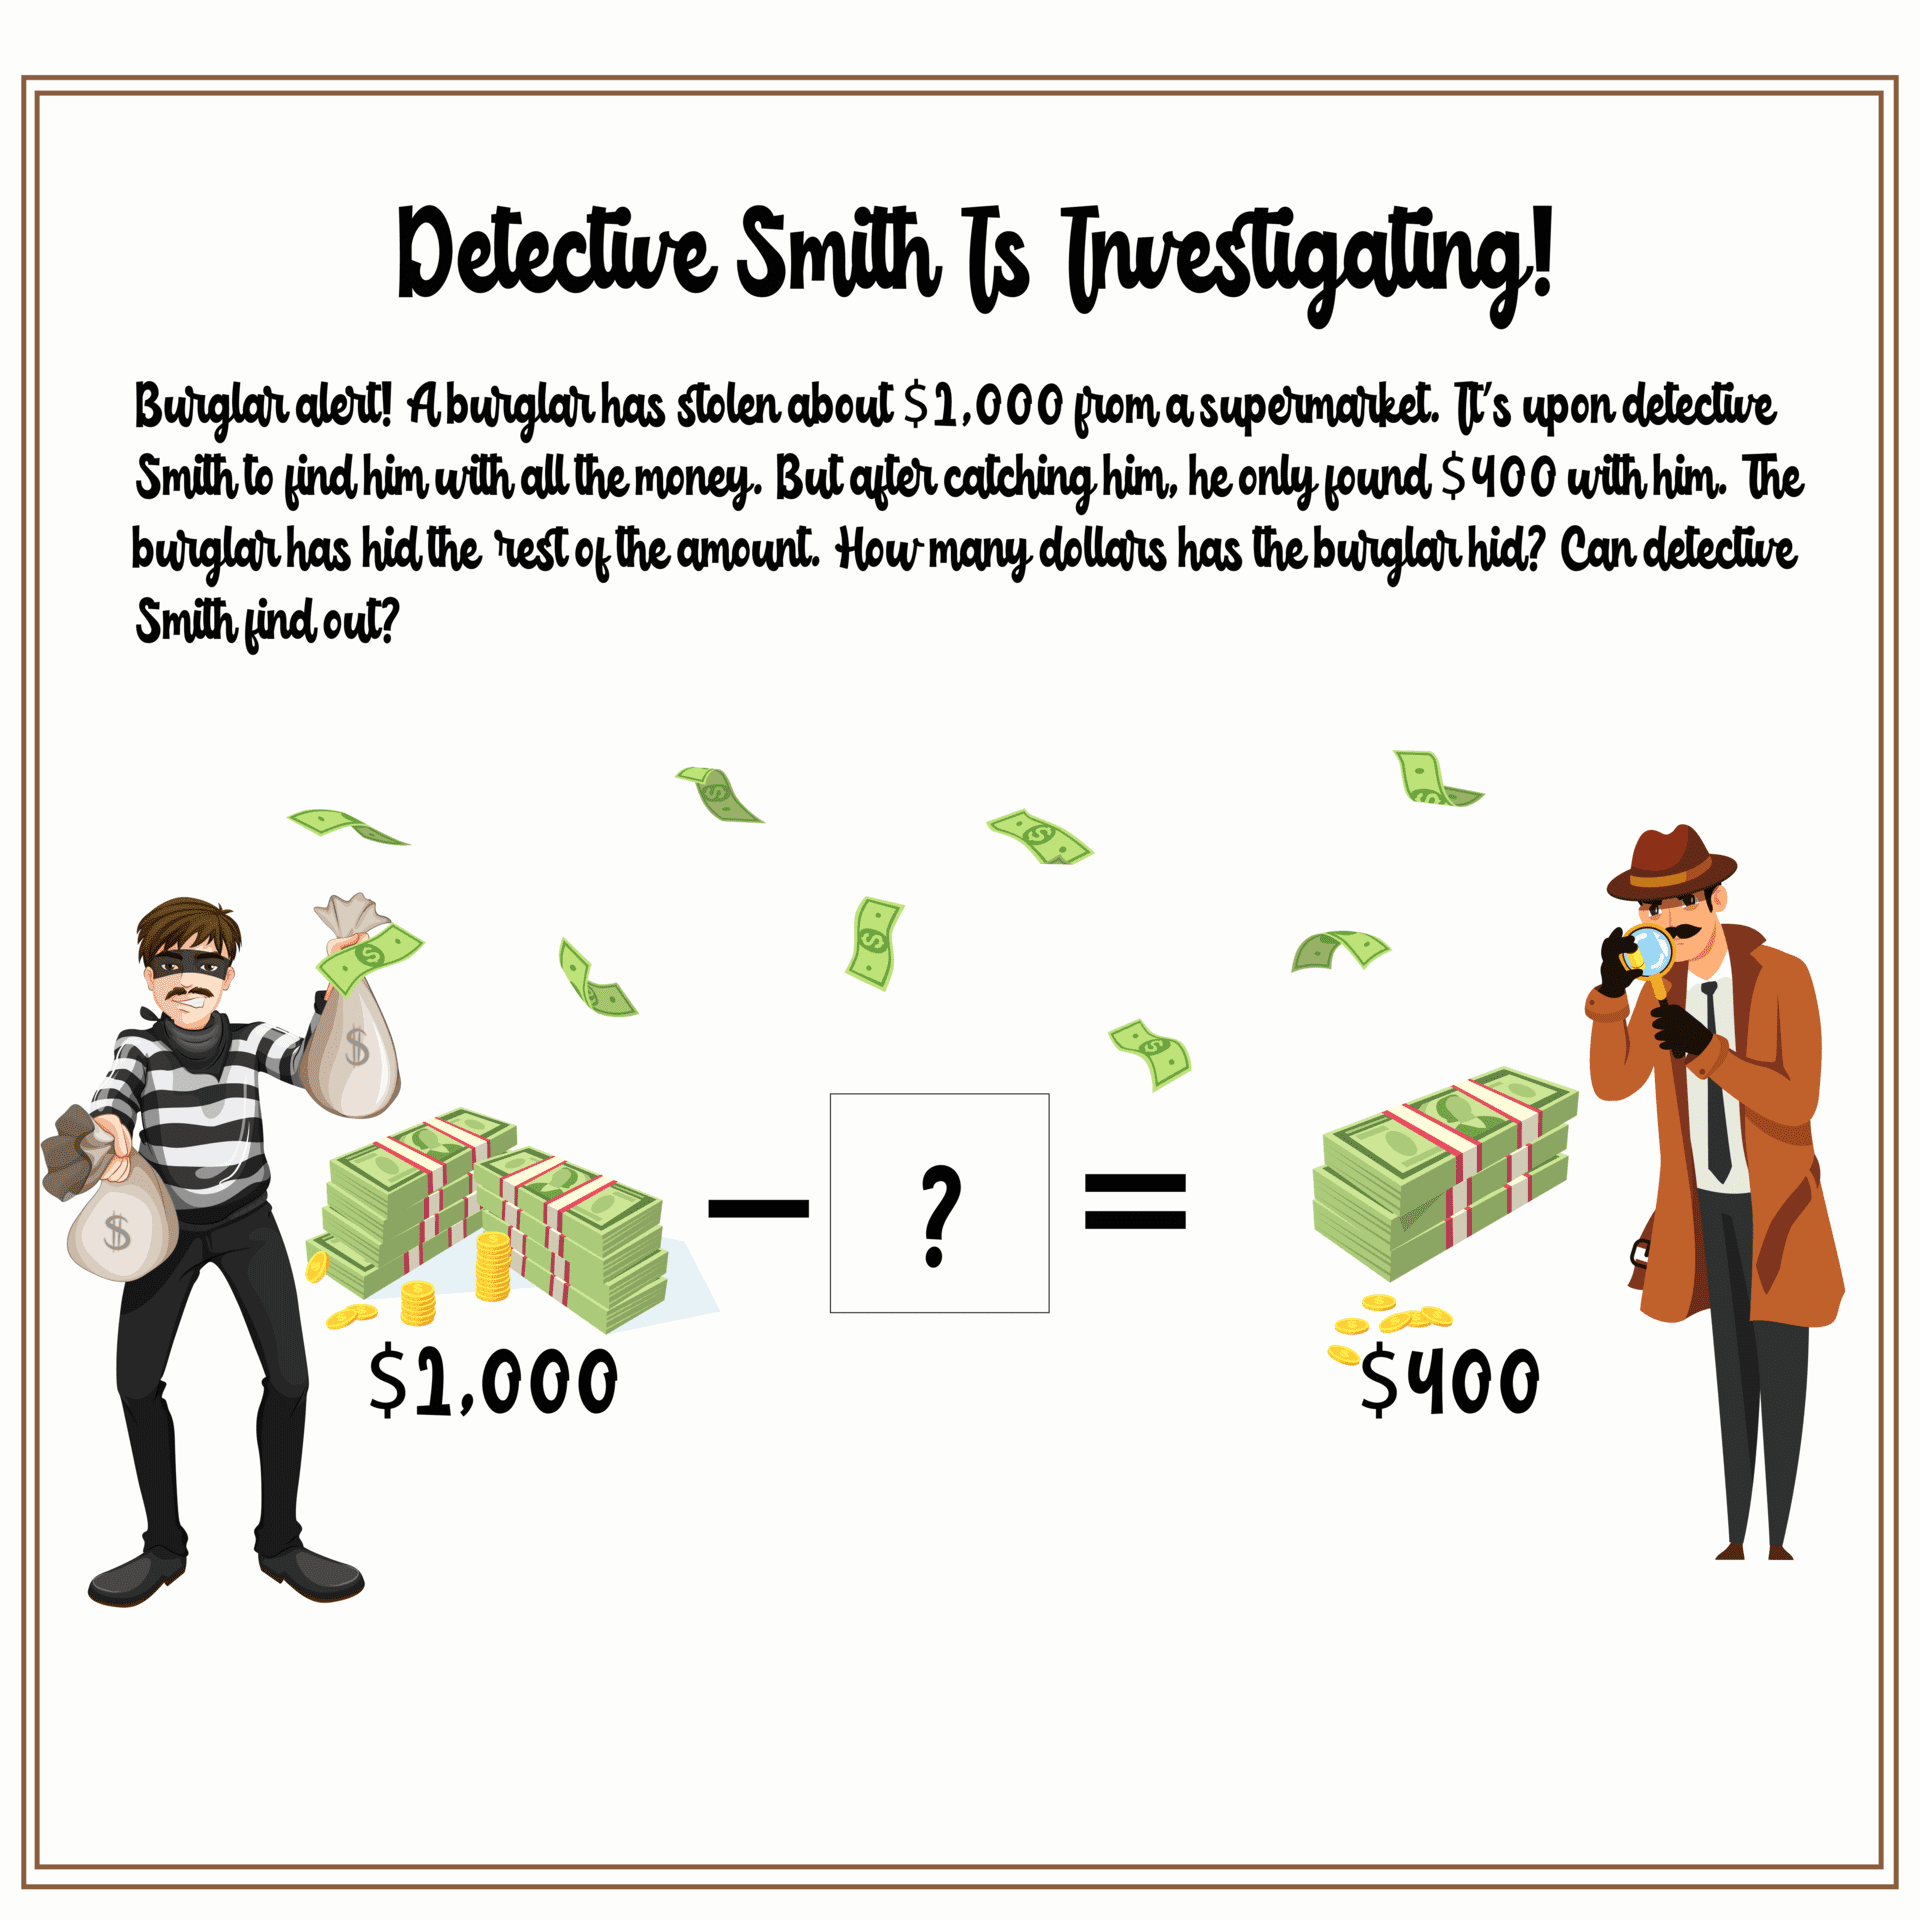 Detective Smith Is Investigating to Find the Missing Money